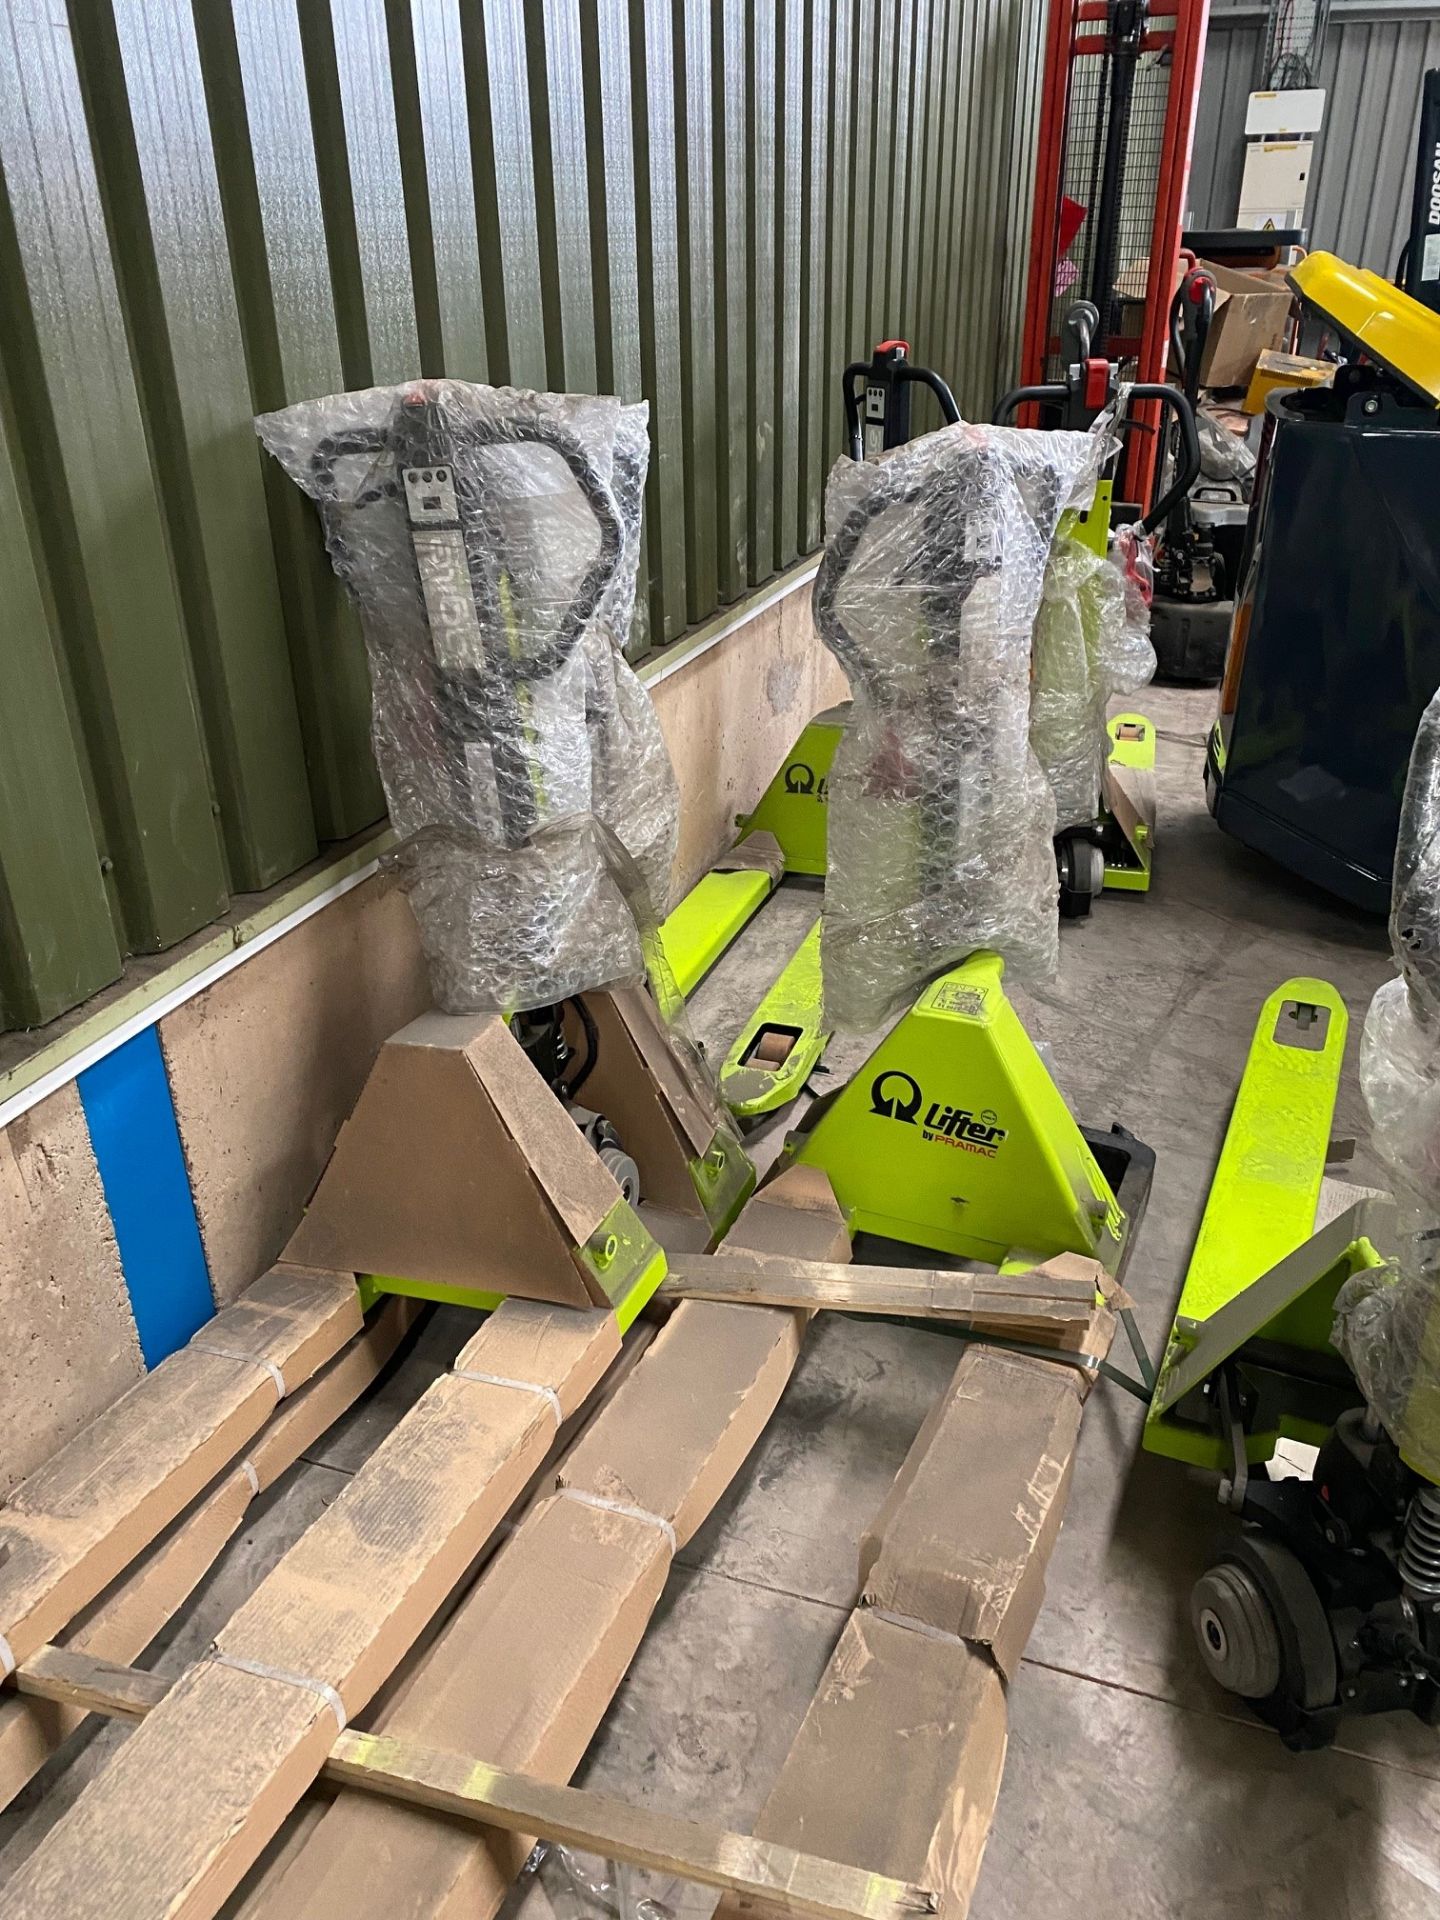 7 X NEW AGILE PLUS ELECTRIC POWERED PALLET TRUCK - RRP OVER £10,000 - SEE DESCRIPTION